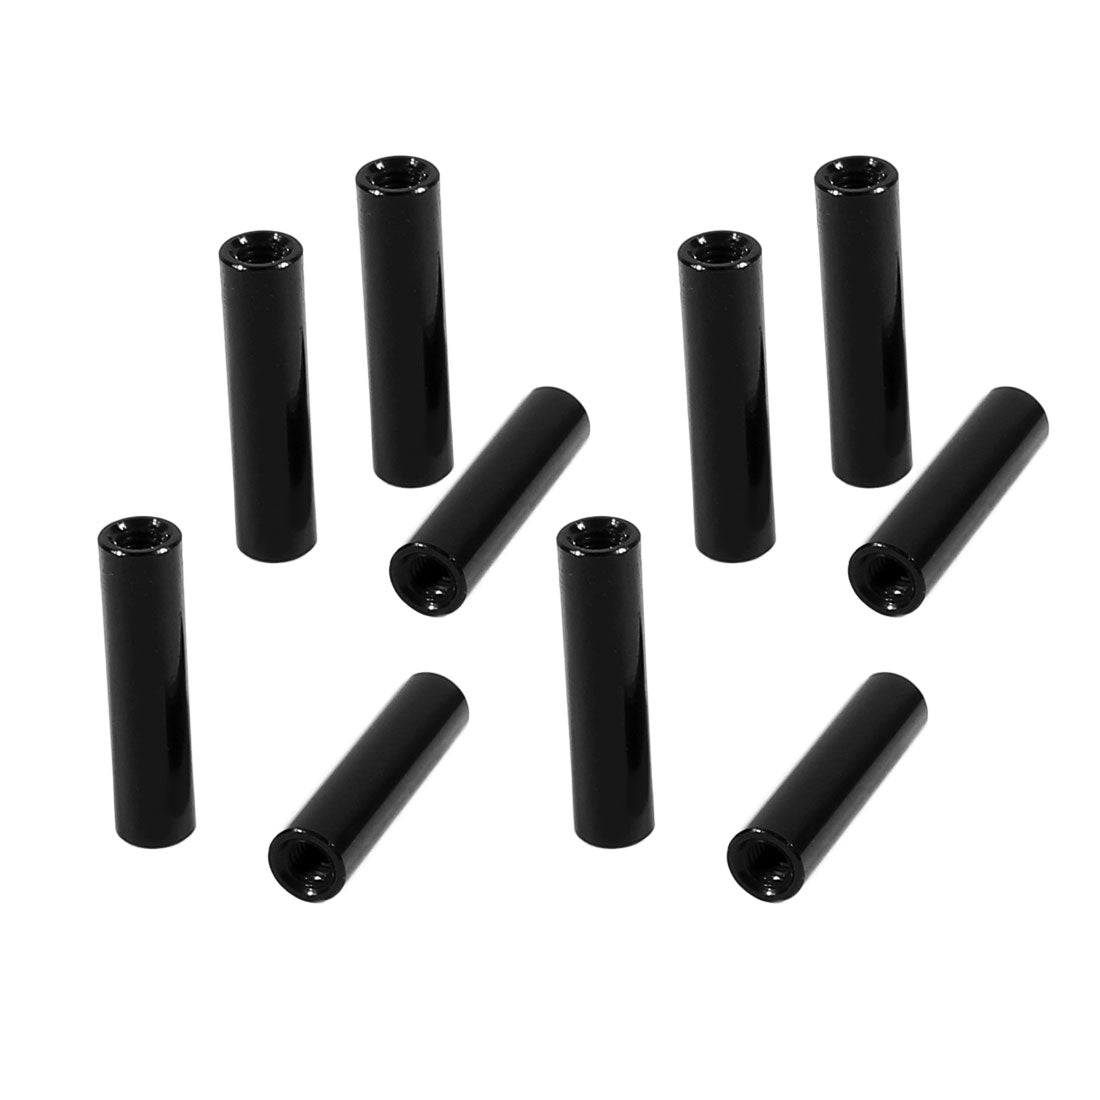 uxcell Uxcell 10Pcs M3 x 20mm Round Aluminum Column Alloy Standoff Spacer Stud Fastener for Quadcopter Black